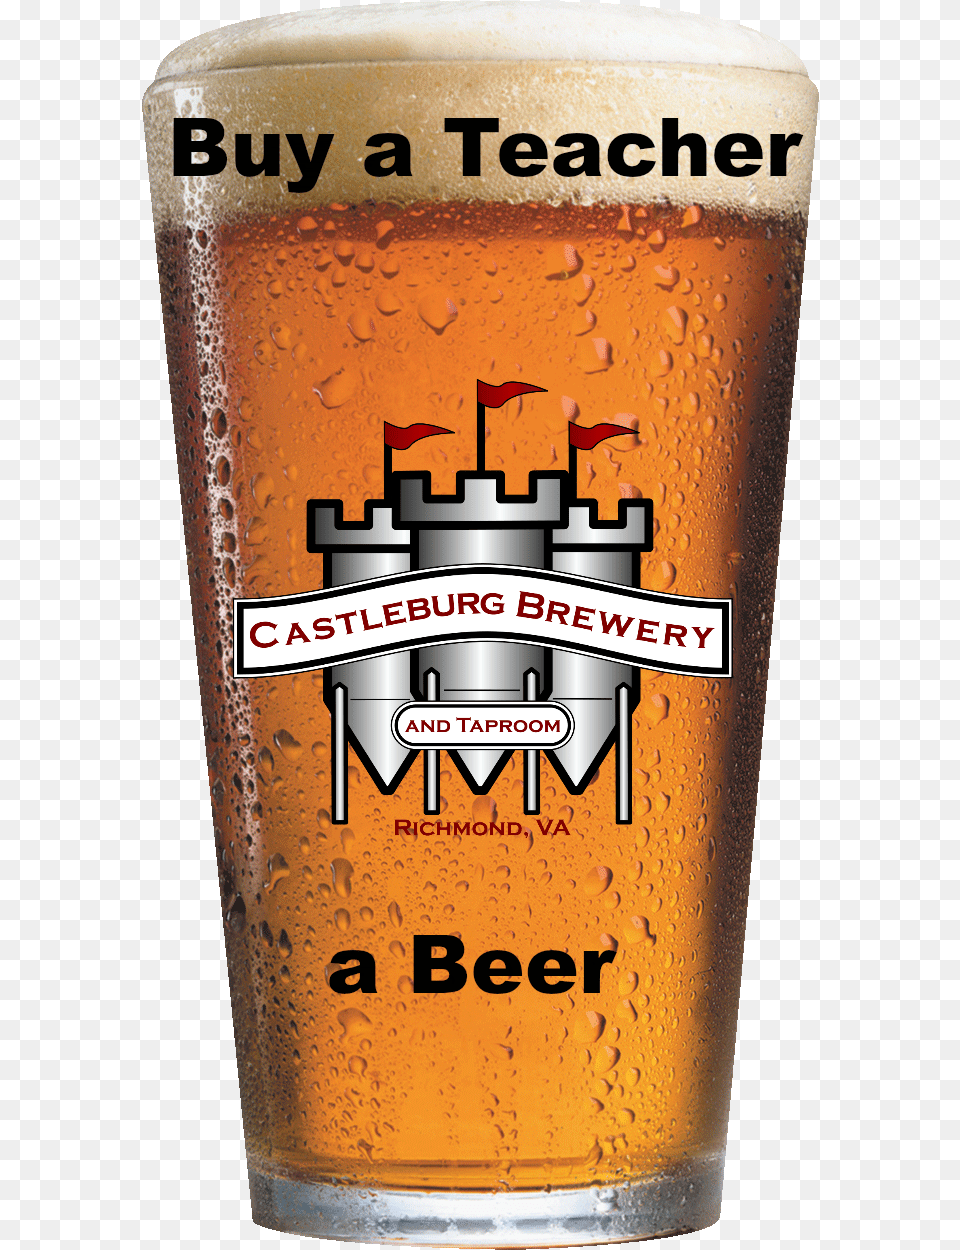 Castleburg Brewery Amp Taproom Castleburg Brewery And Taproom, Alcohol, Beer, Beverage, Glass Png